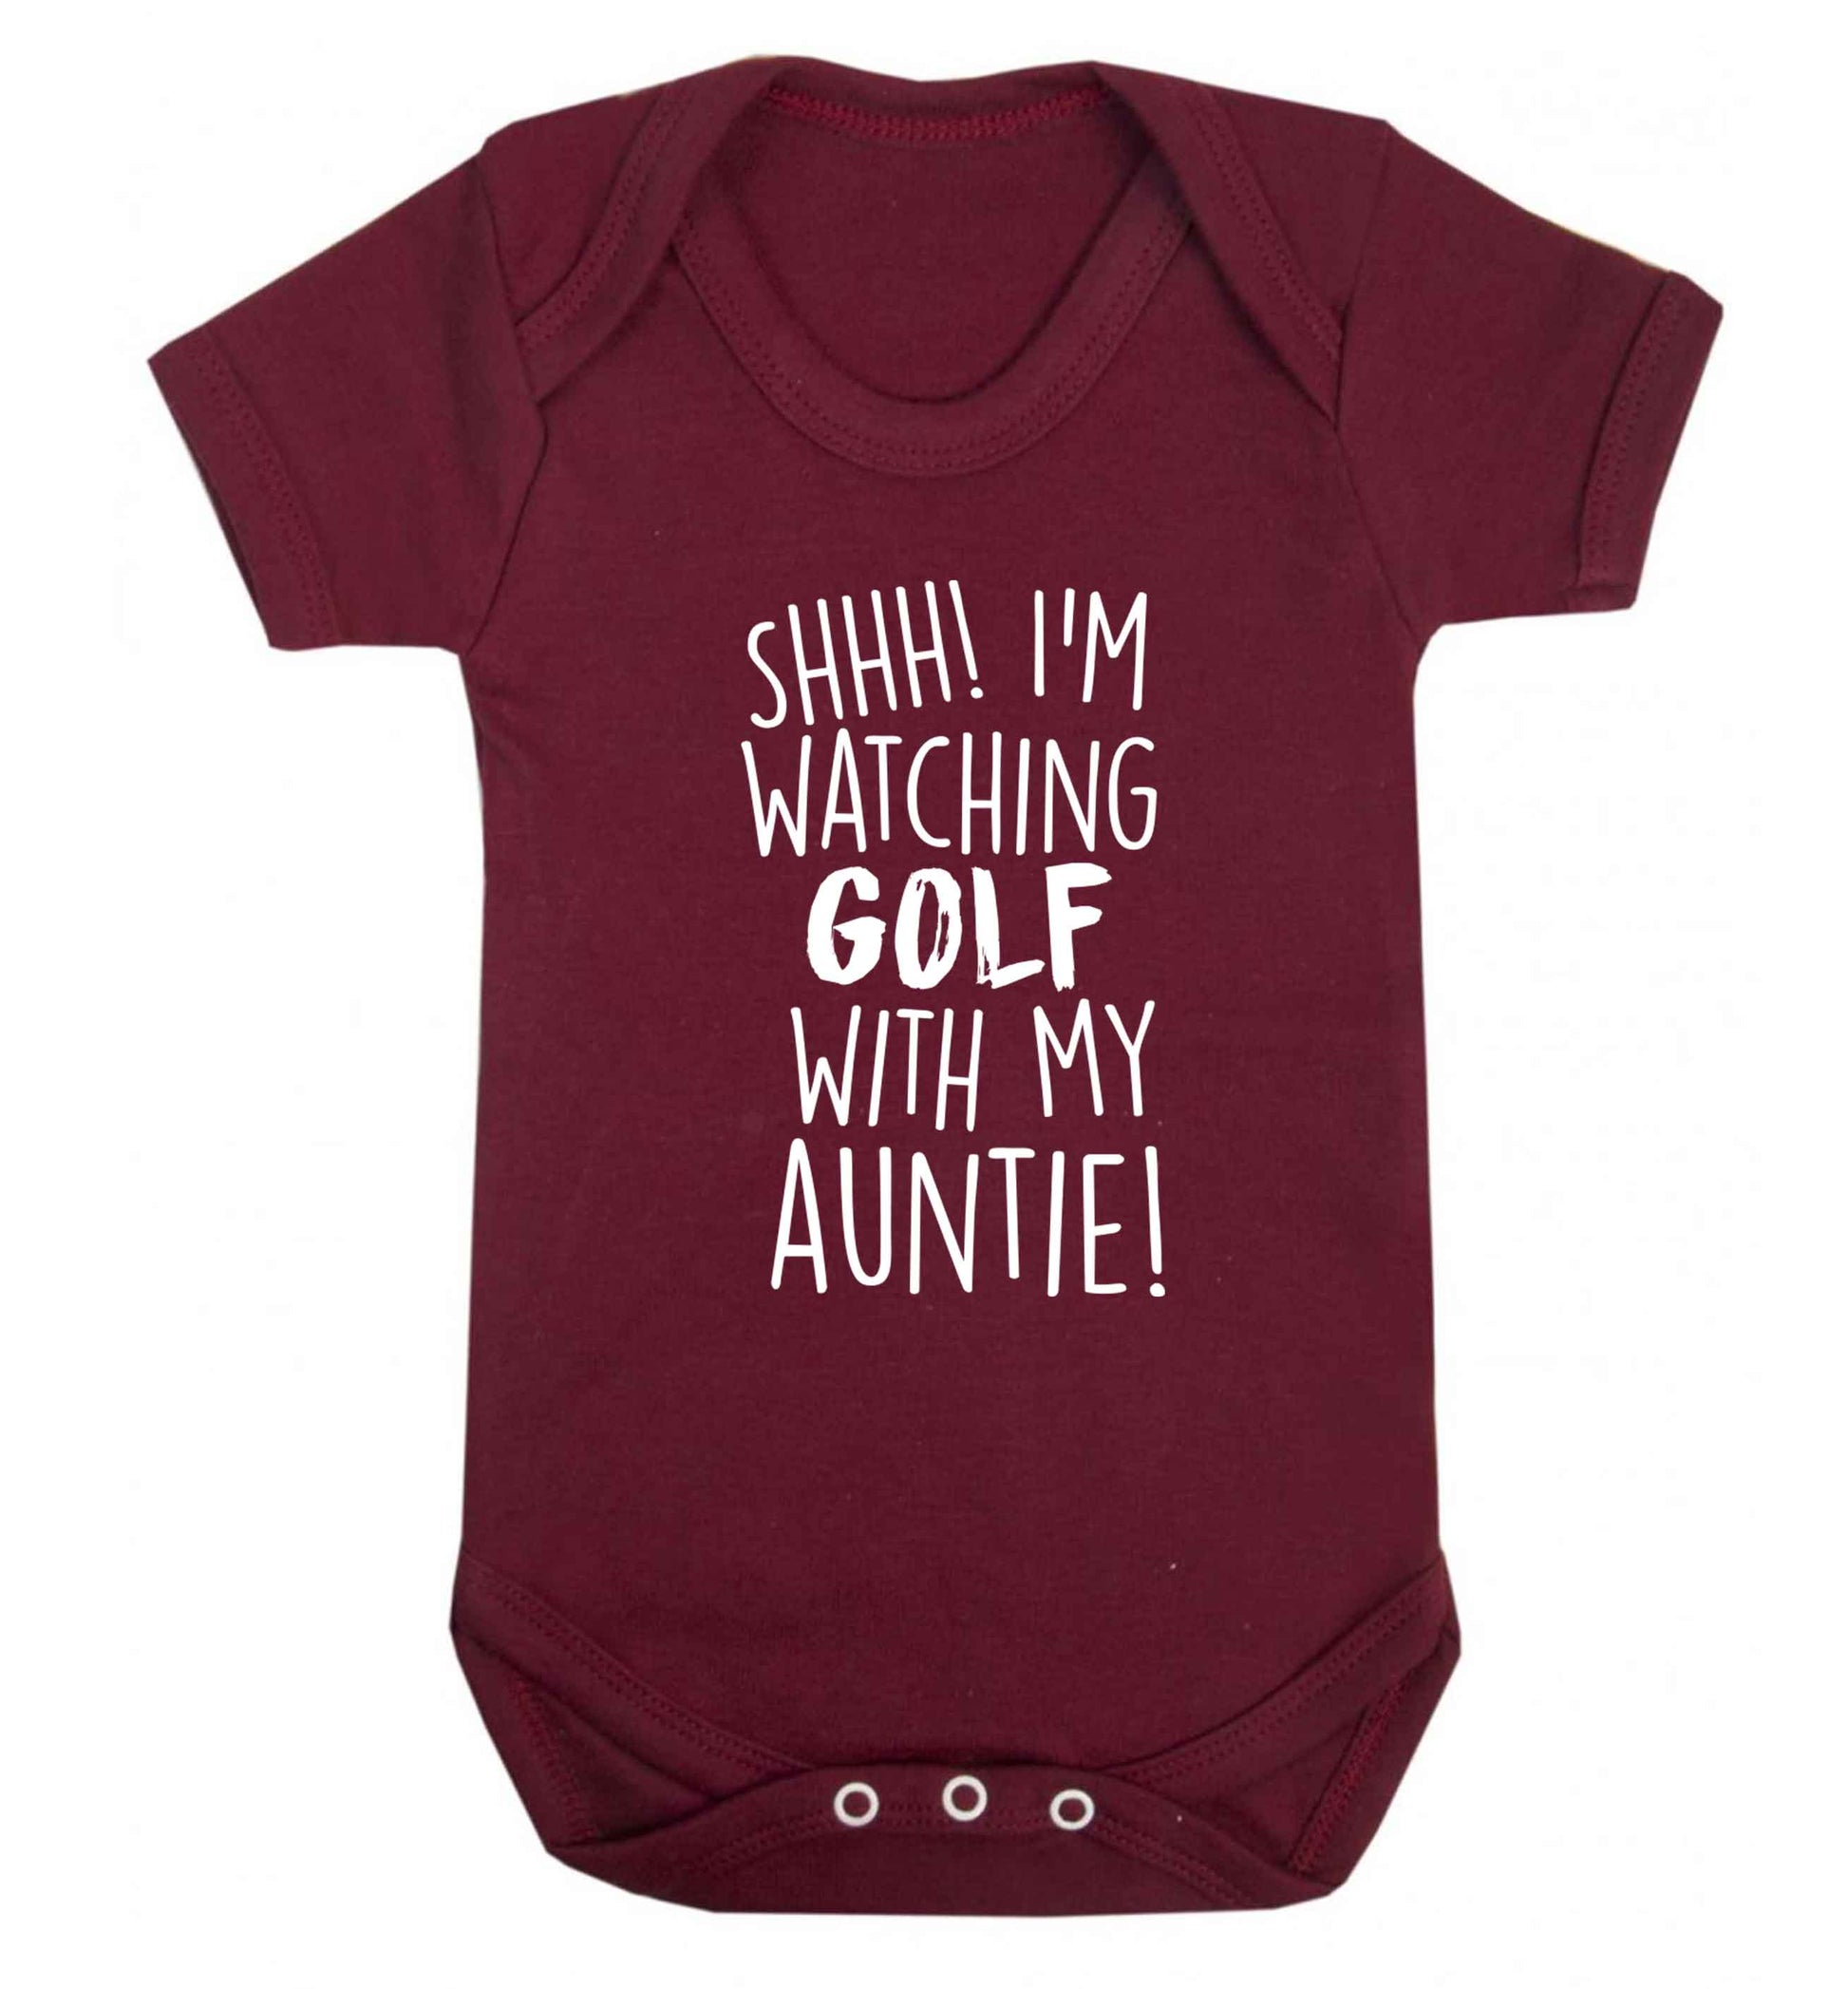 Shh I'm watching golf with my auntie Baby Vest maroon 18-24 months